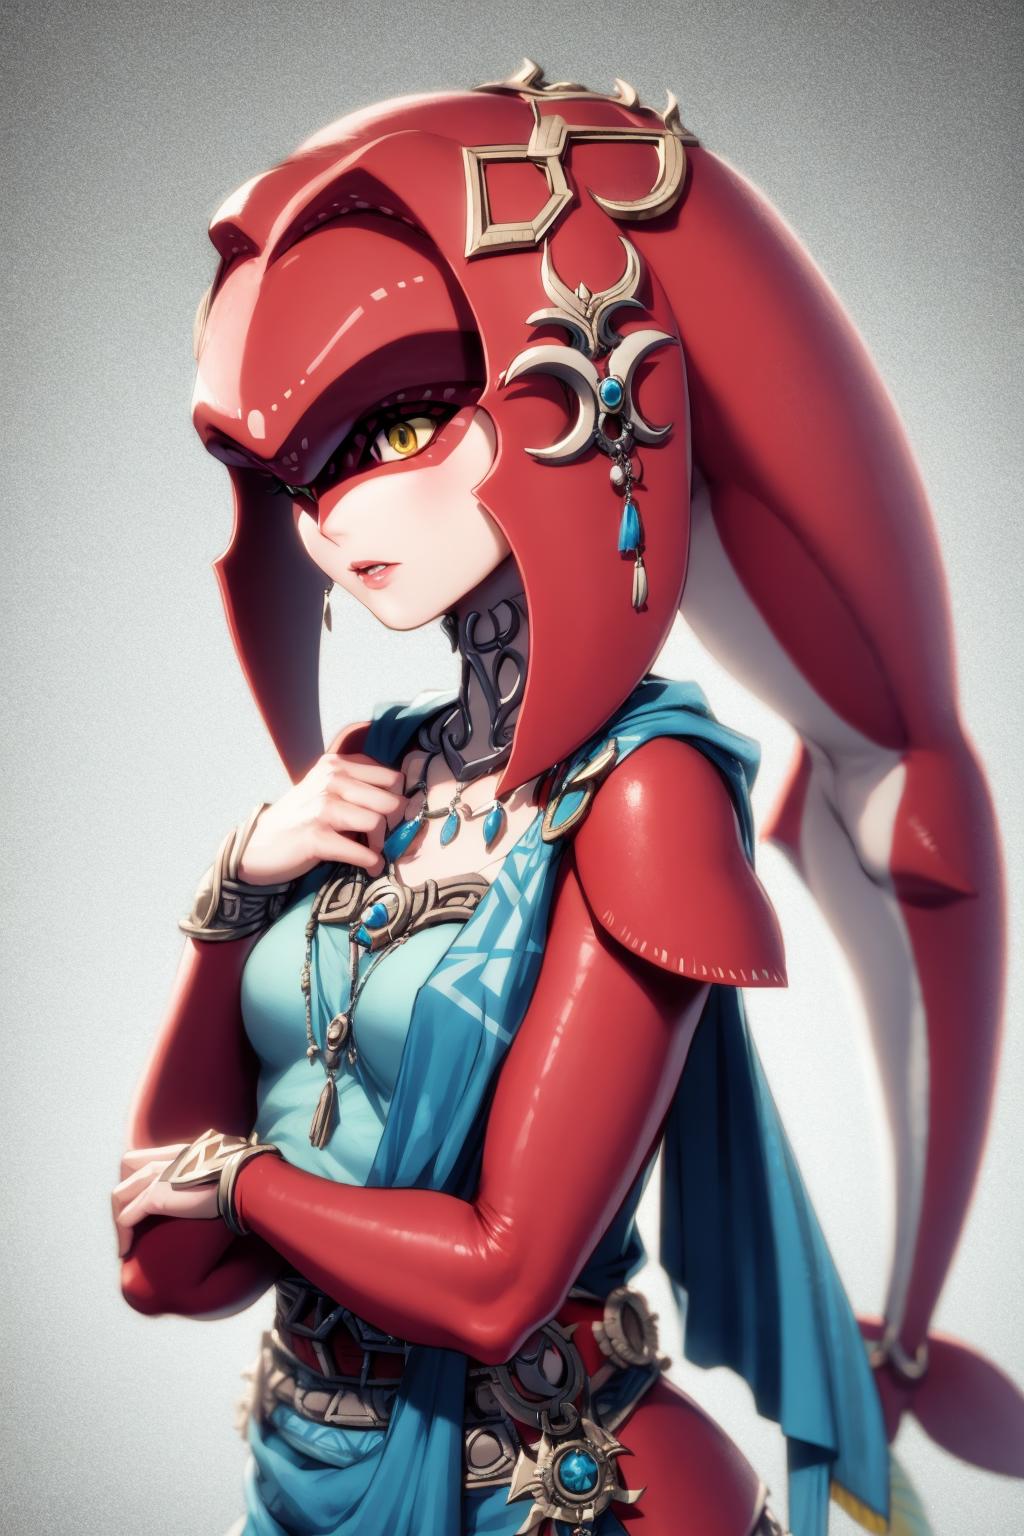 AI model image by silvermoong